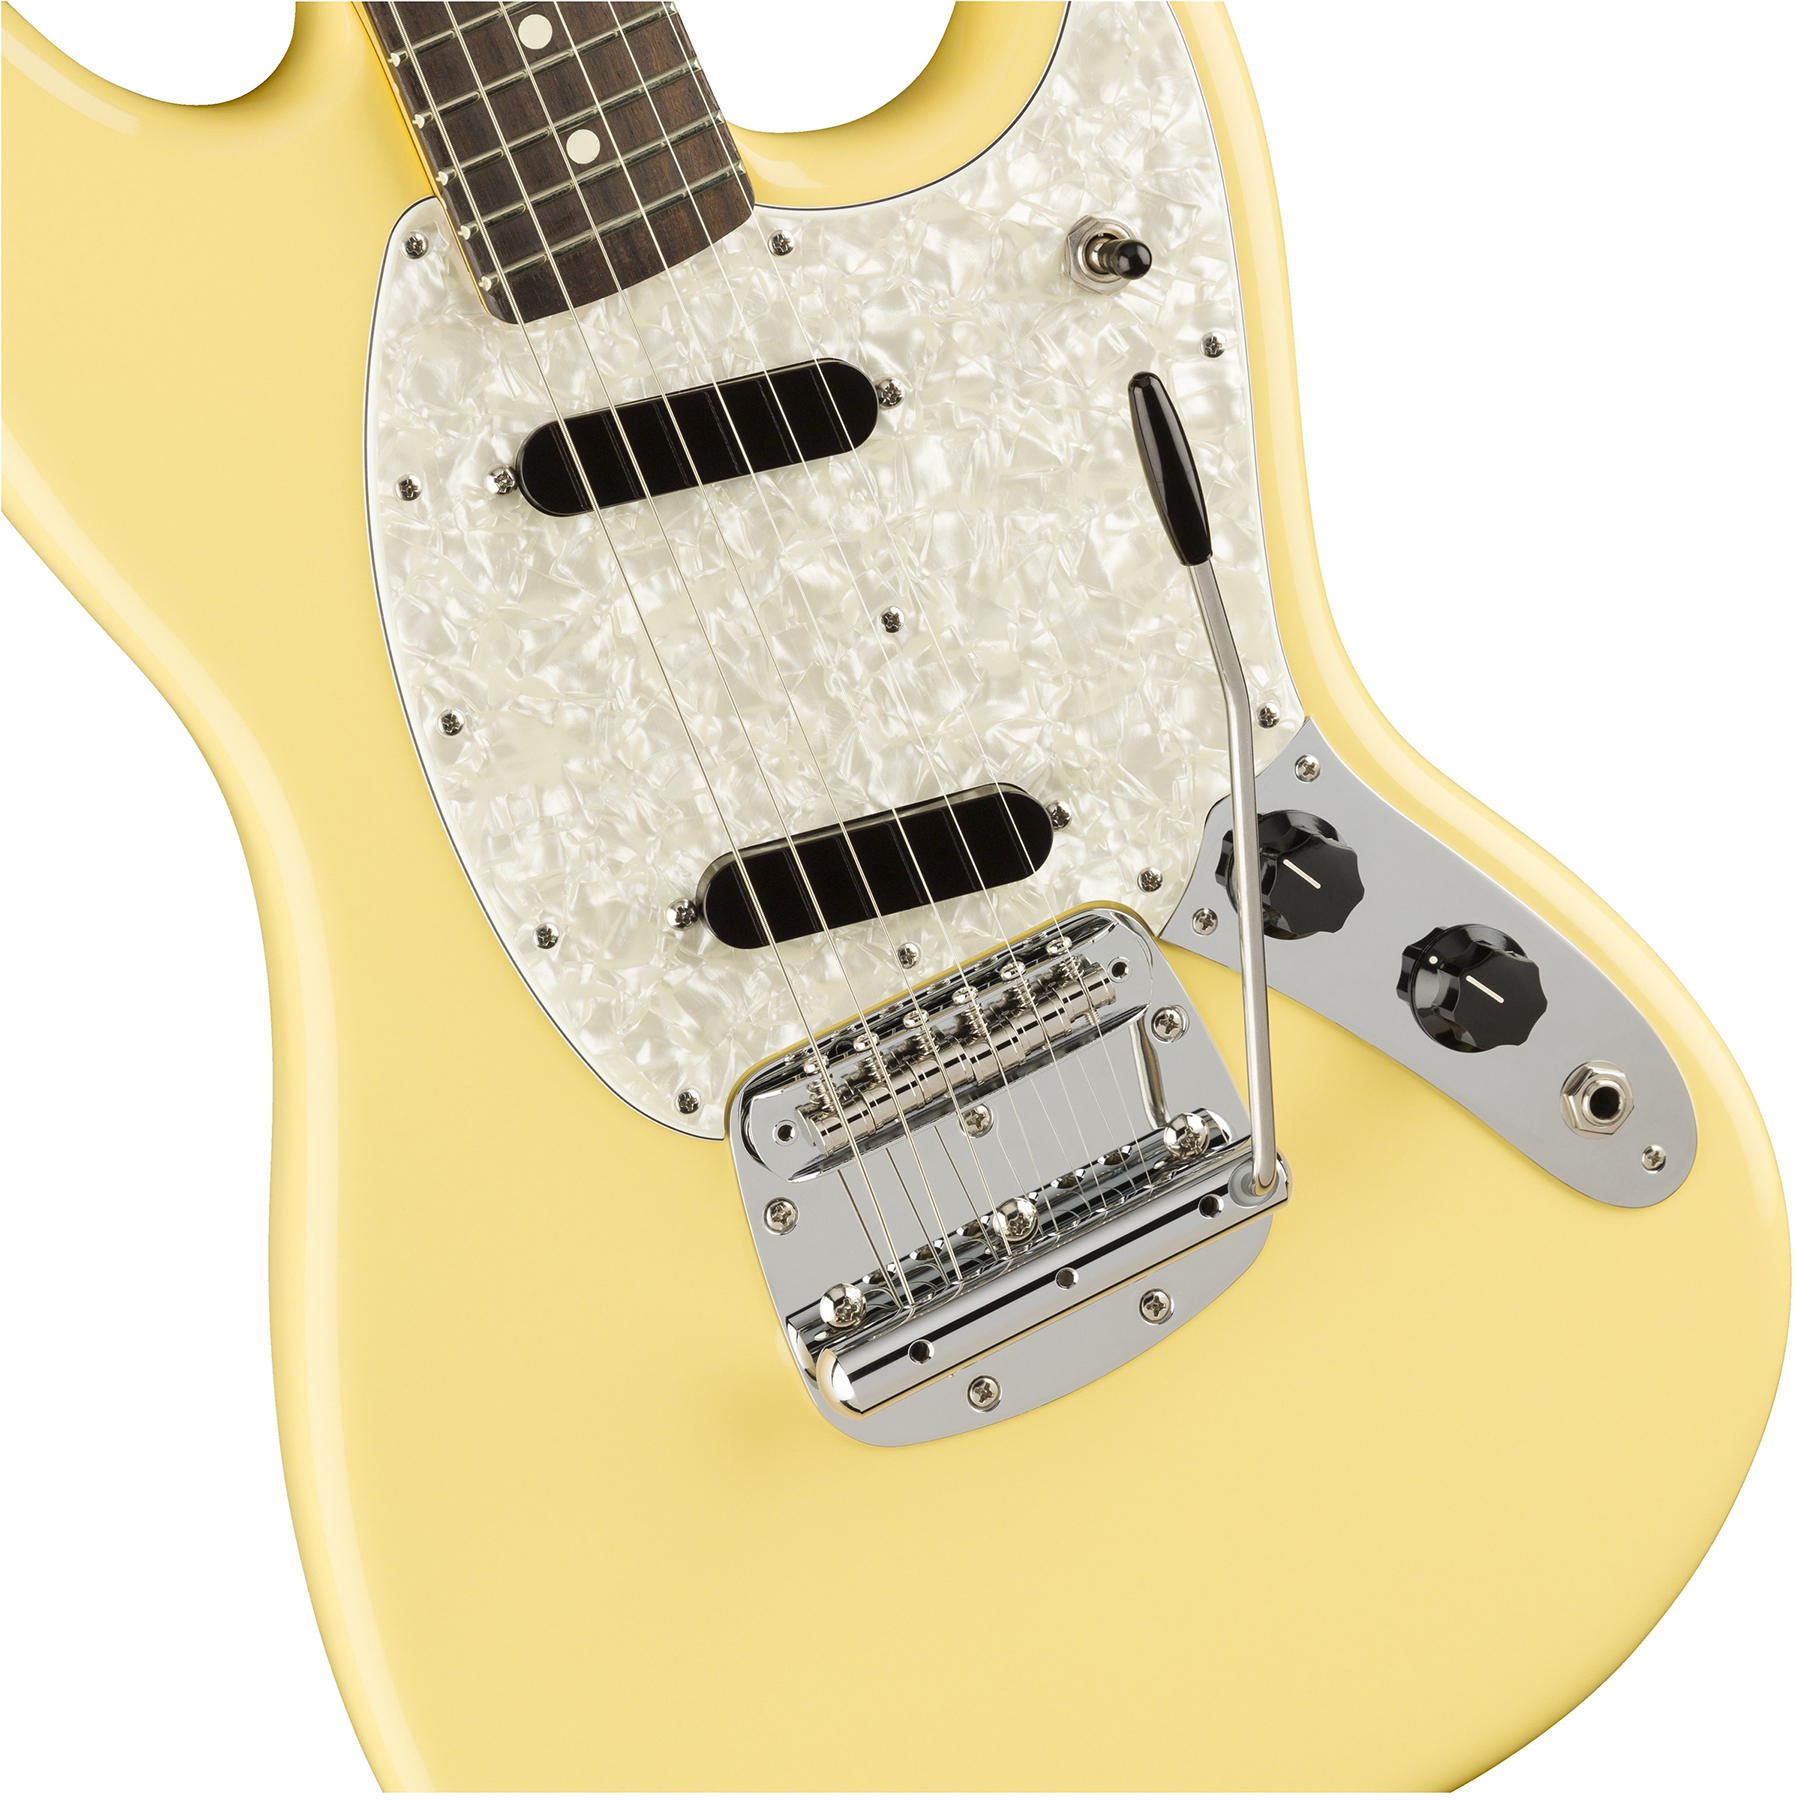 Fender Mustang American Performer Usa Ss Rw - Vintage White - Double cut electric guitar - Variation 2